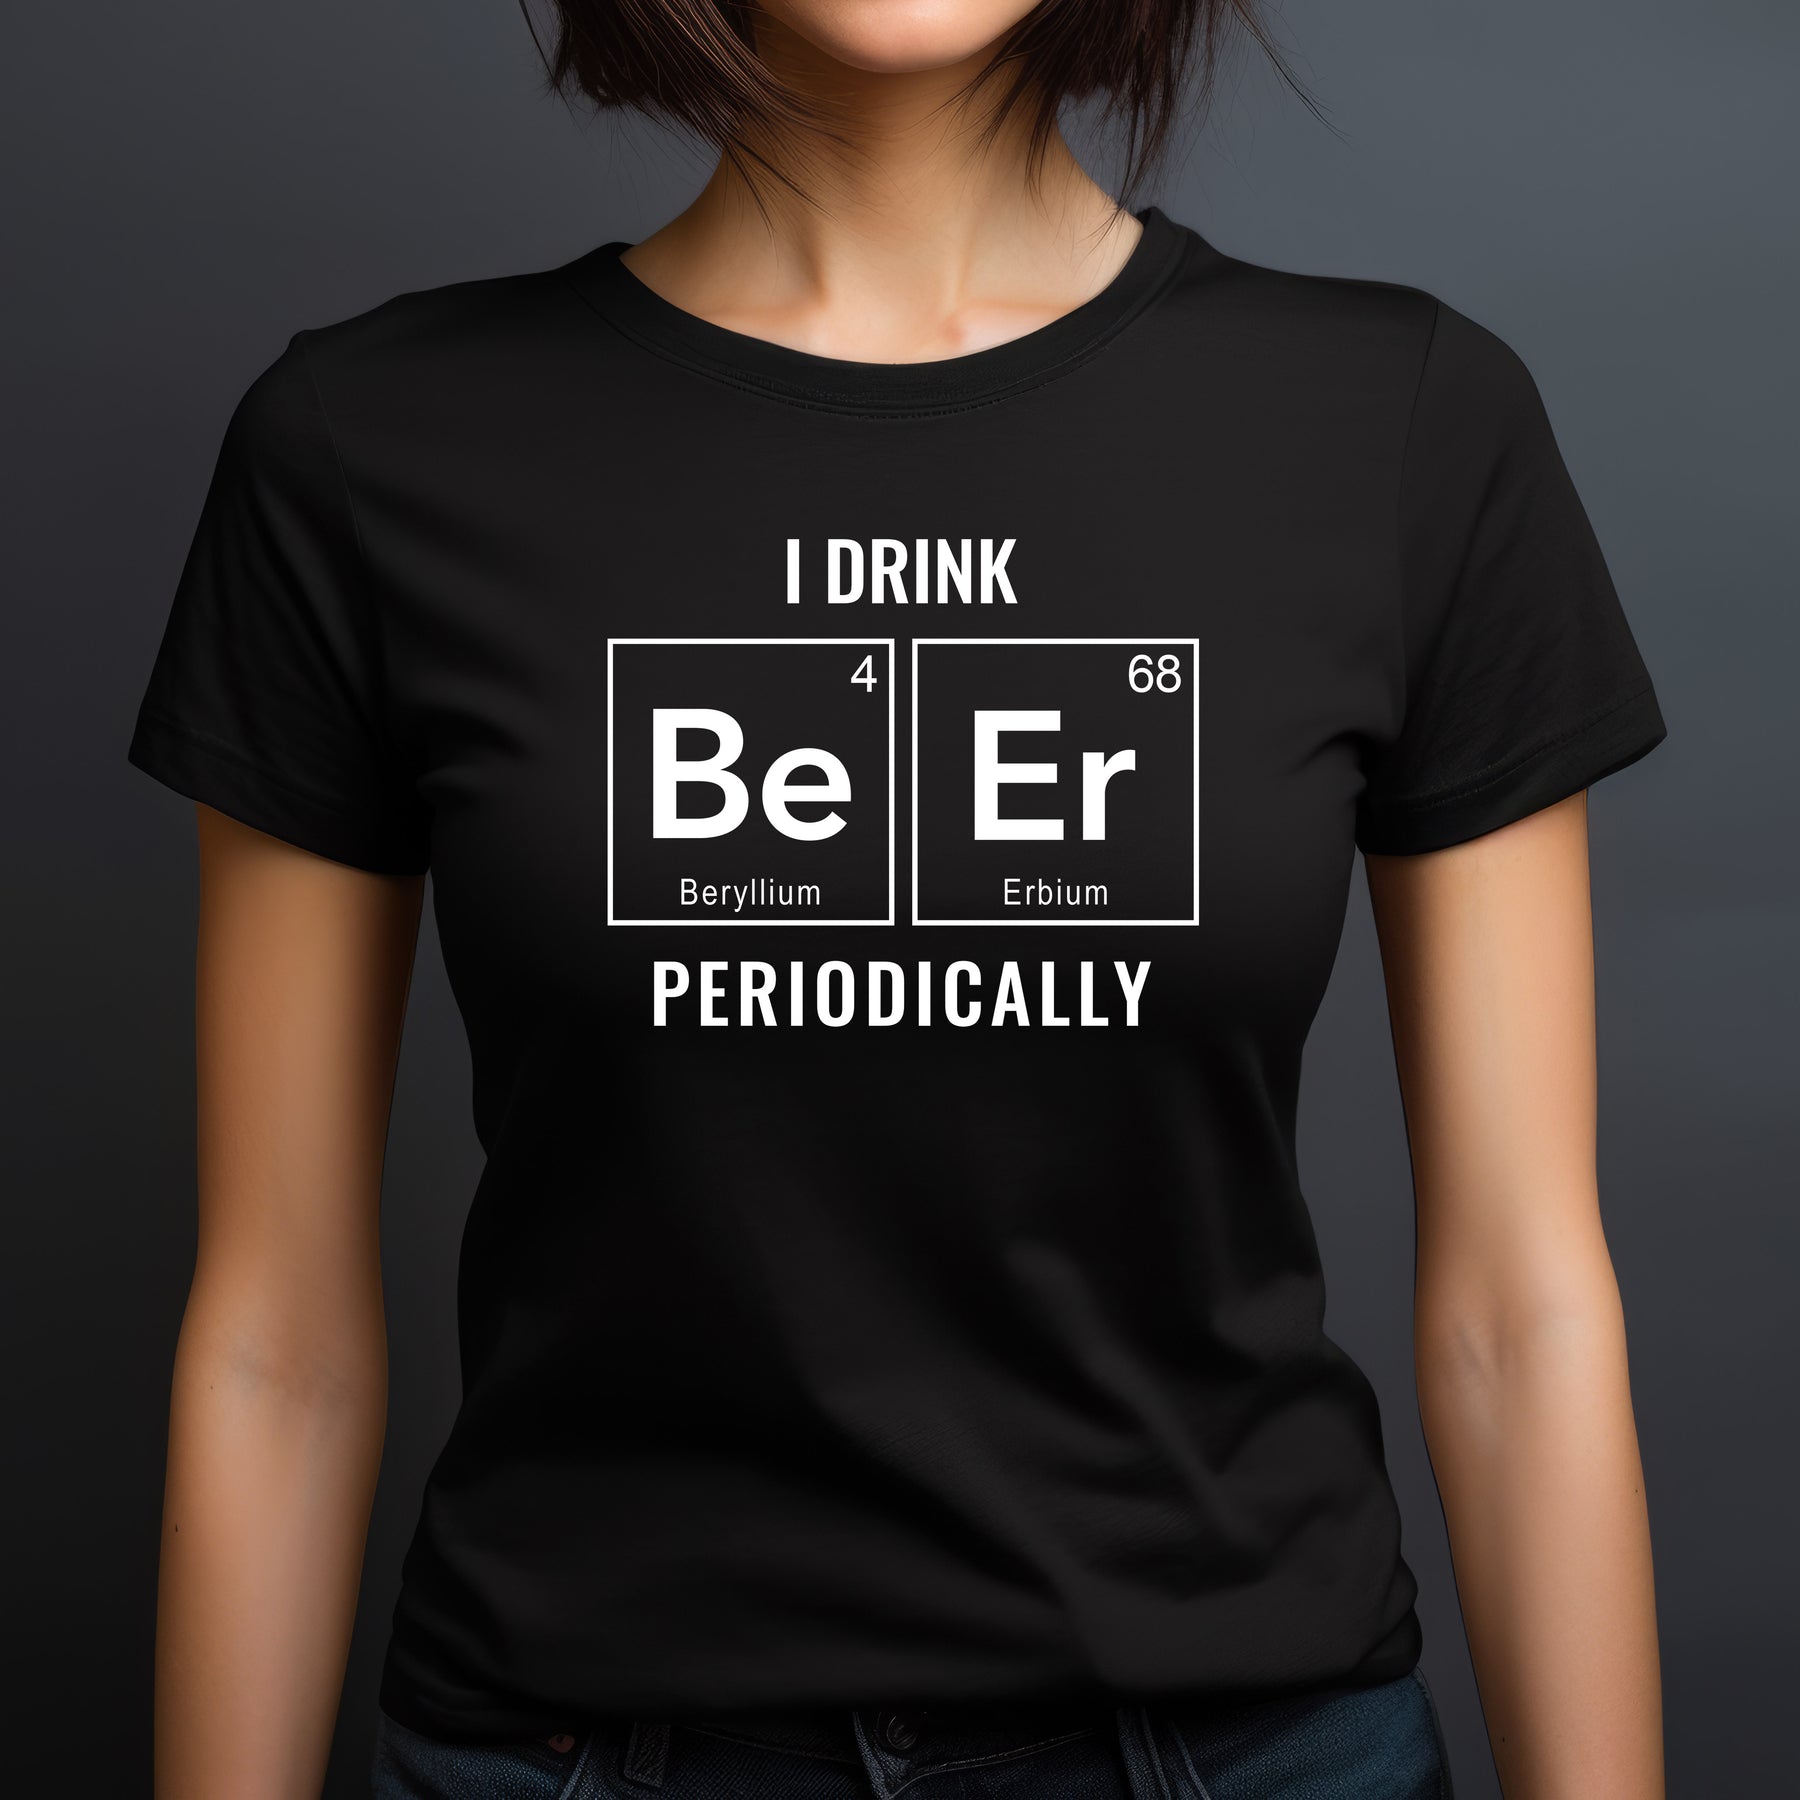 "I Drink Periodically" Premium Midweight Ringspun Cotton T-Shirt - Mens/Womens Fits